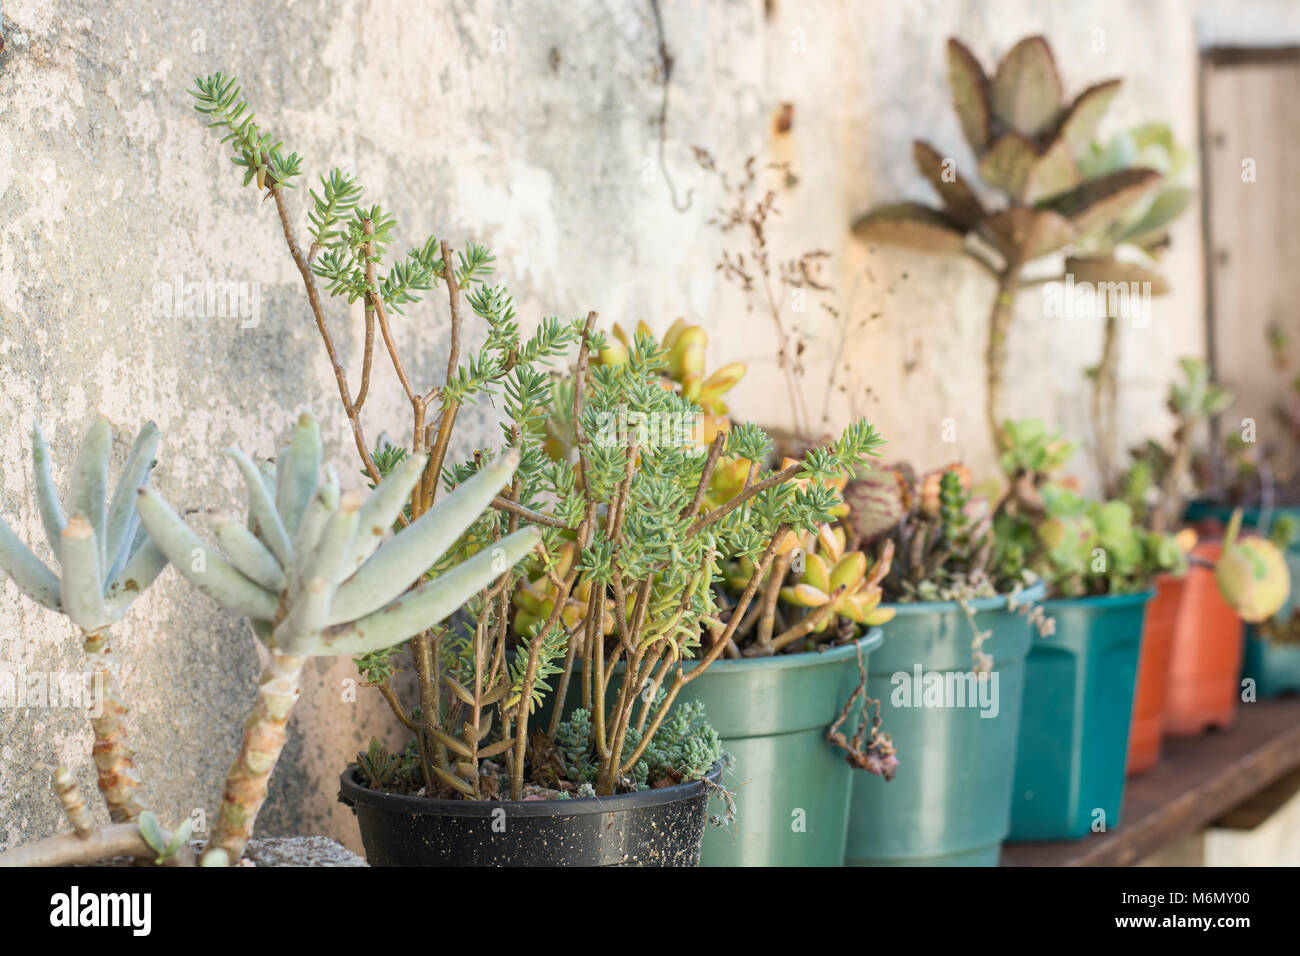 Row of succulent plants in pots Stock Photo